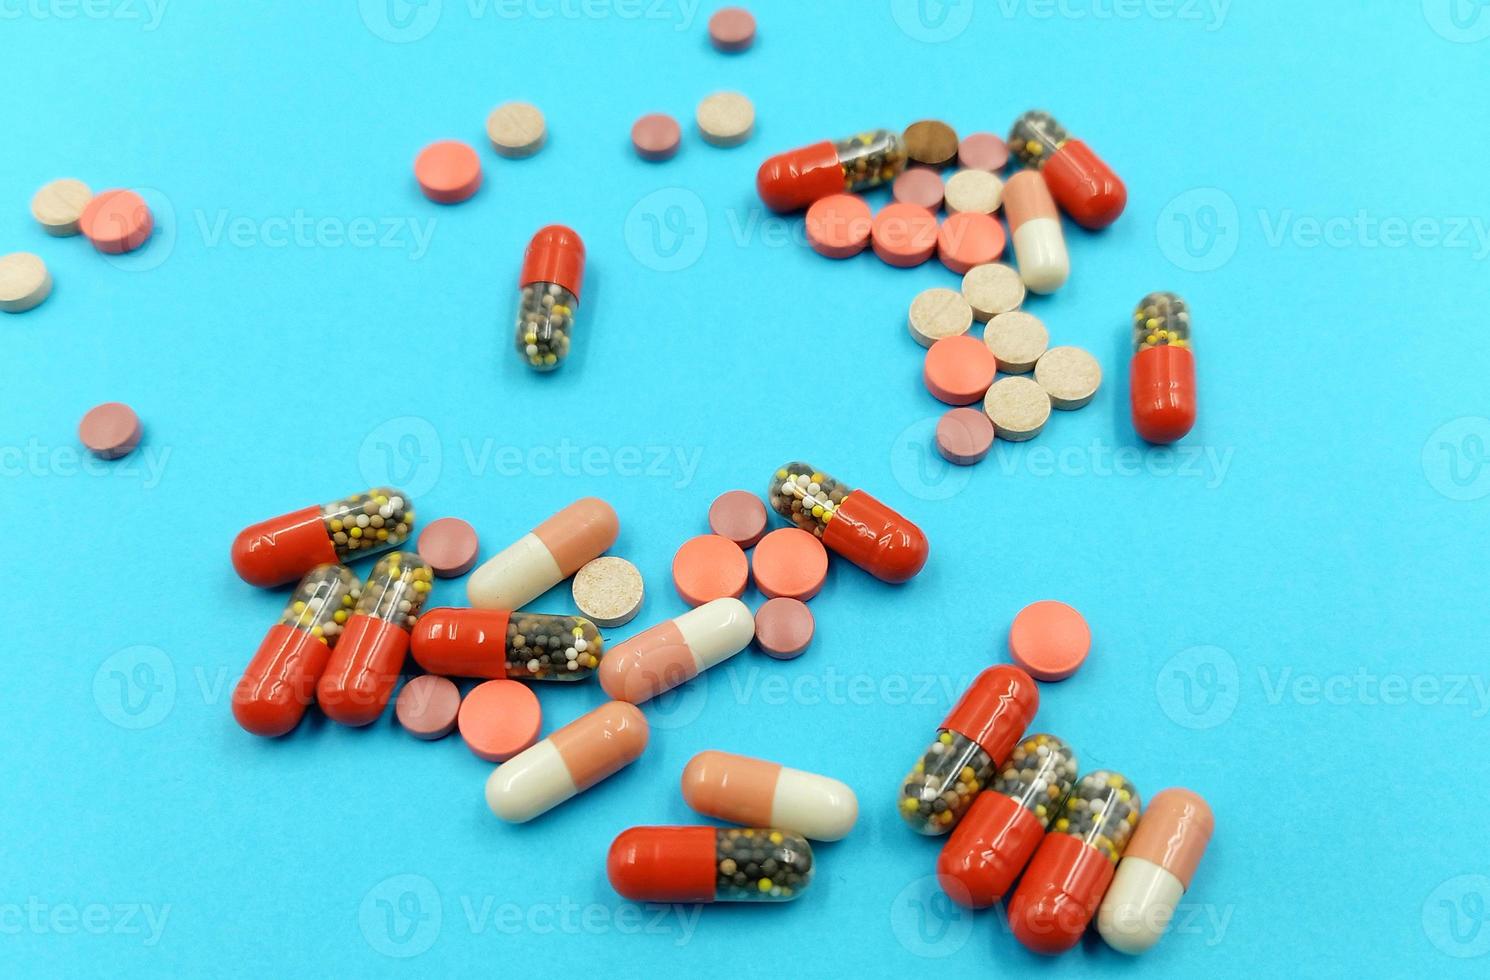 Assorted pharmaceutical medicine pills, tablets and capsules photo